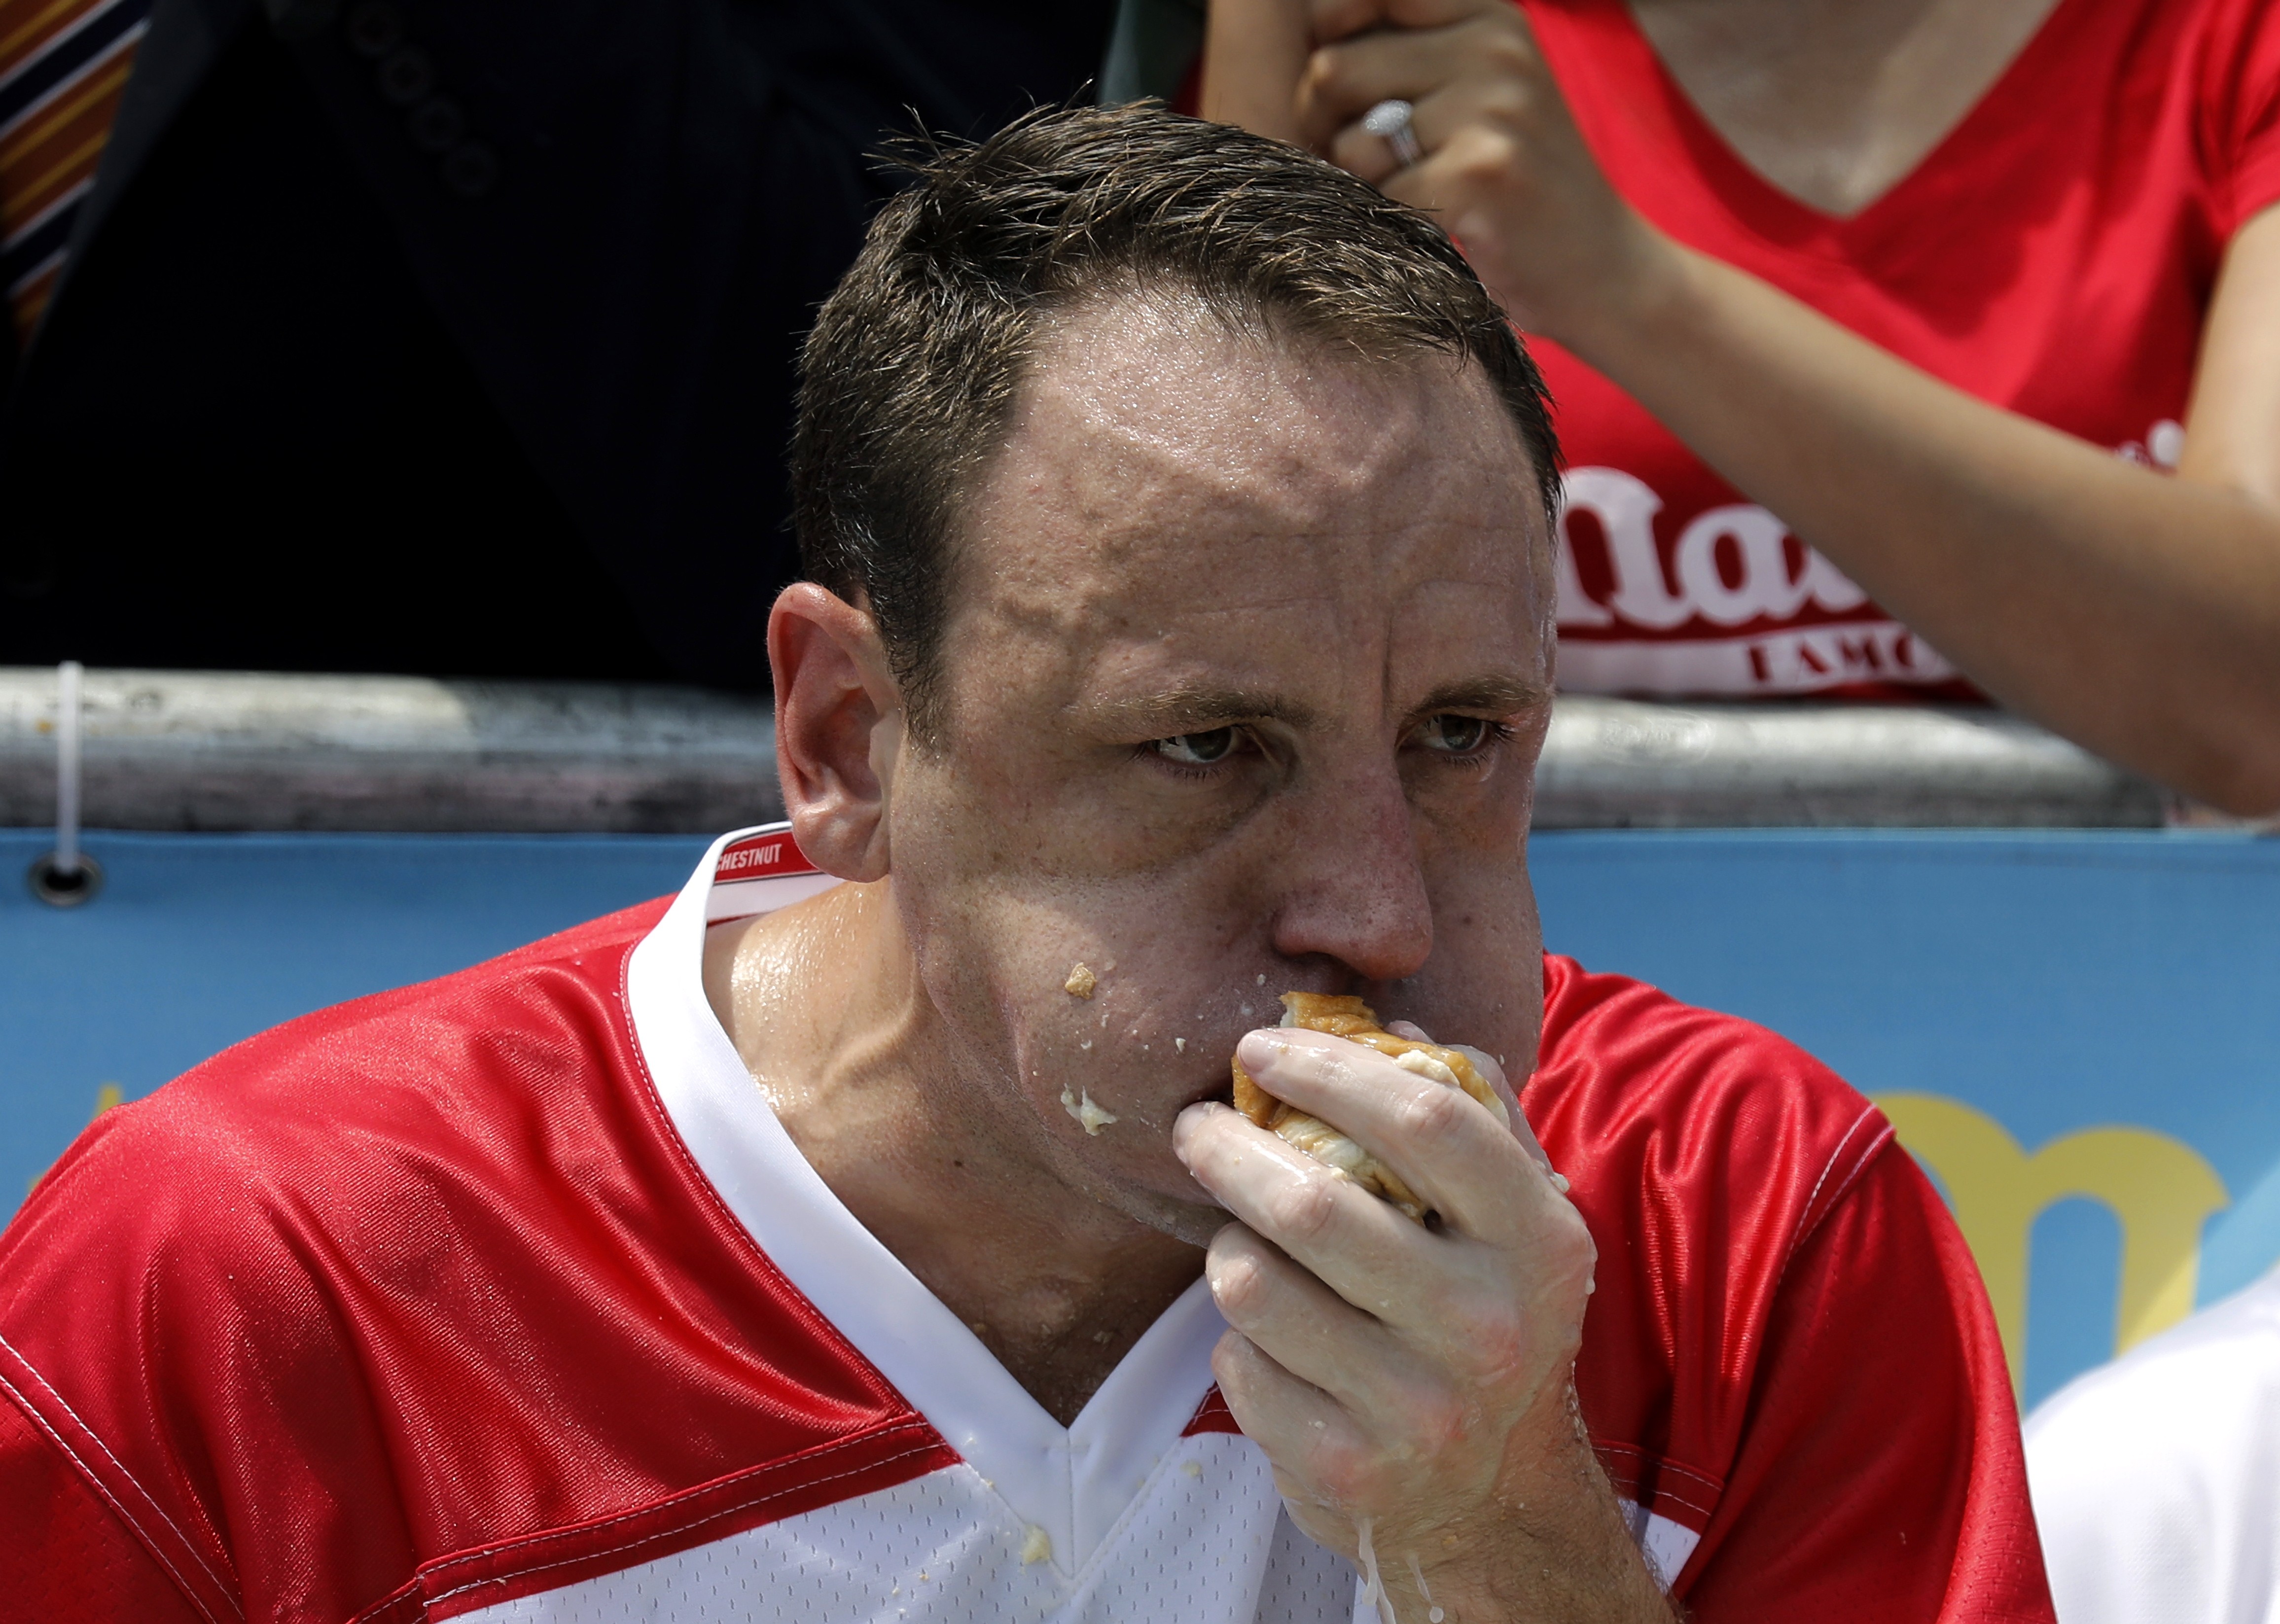 Being able to eat 74 hot dogs, including buns, in 10 minutes is just the tip of the iceberg when it comes to competitive eating contests. Meet five other gluttons who push their stomachs to the limit